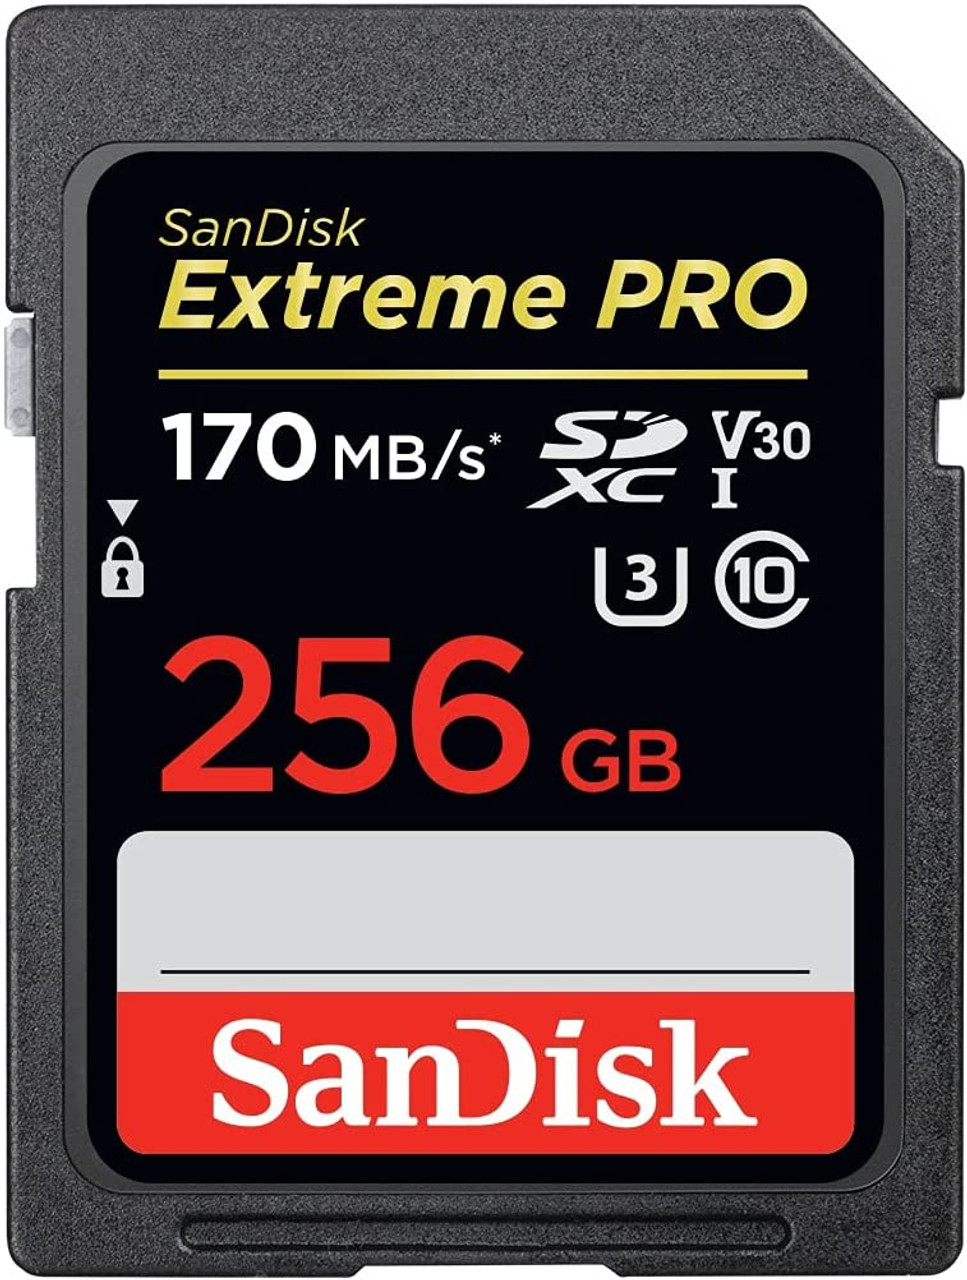 SanDisk 256GB Extreme Pro SD Card, ‎SDSDXXY-256G, AYOUB COMPUTERS